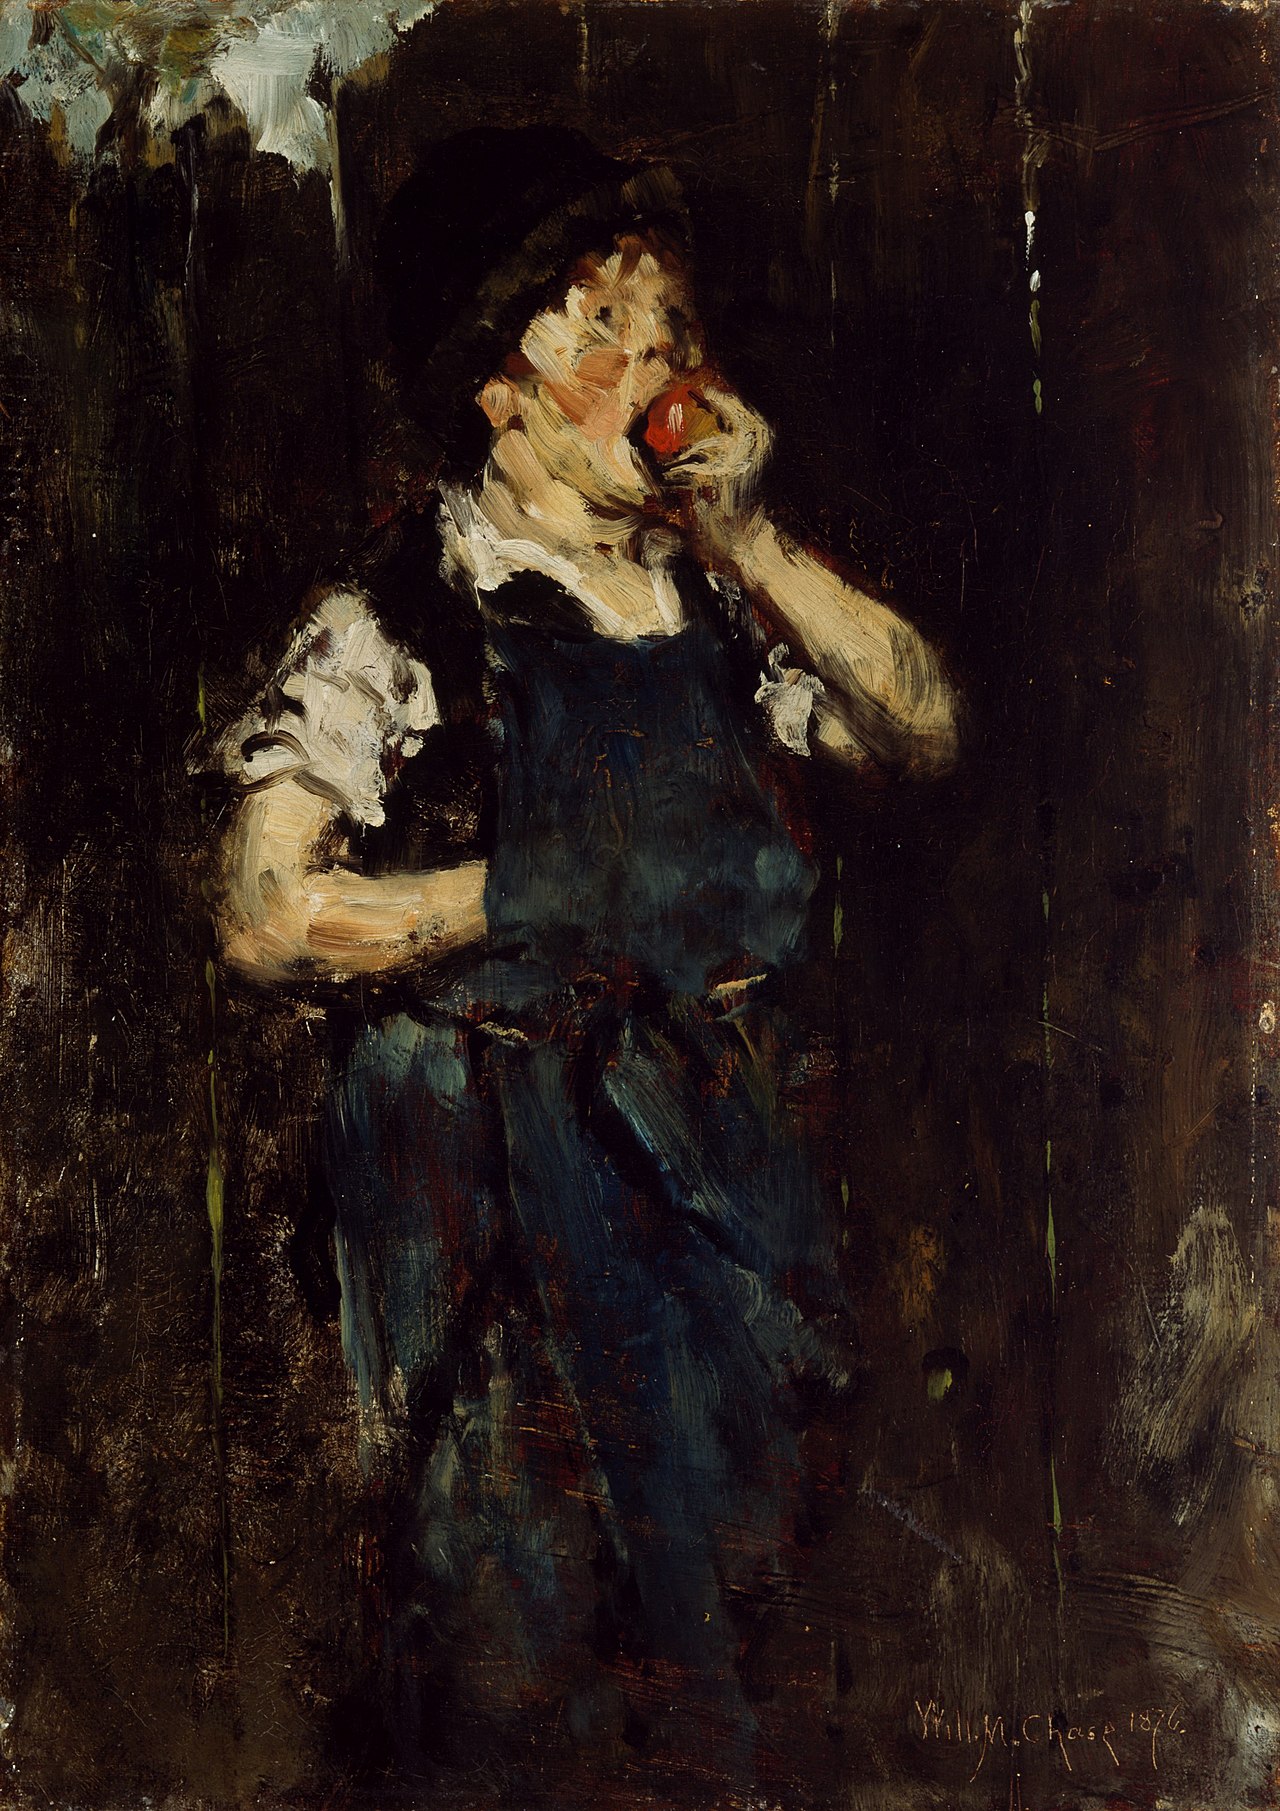 Inspiration: “The Apprentice Boy with Apple,” by William Merritt Chase